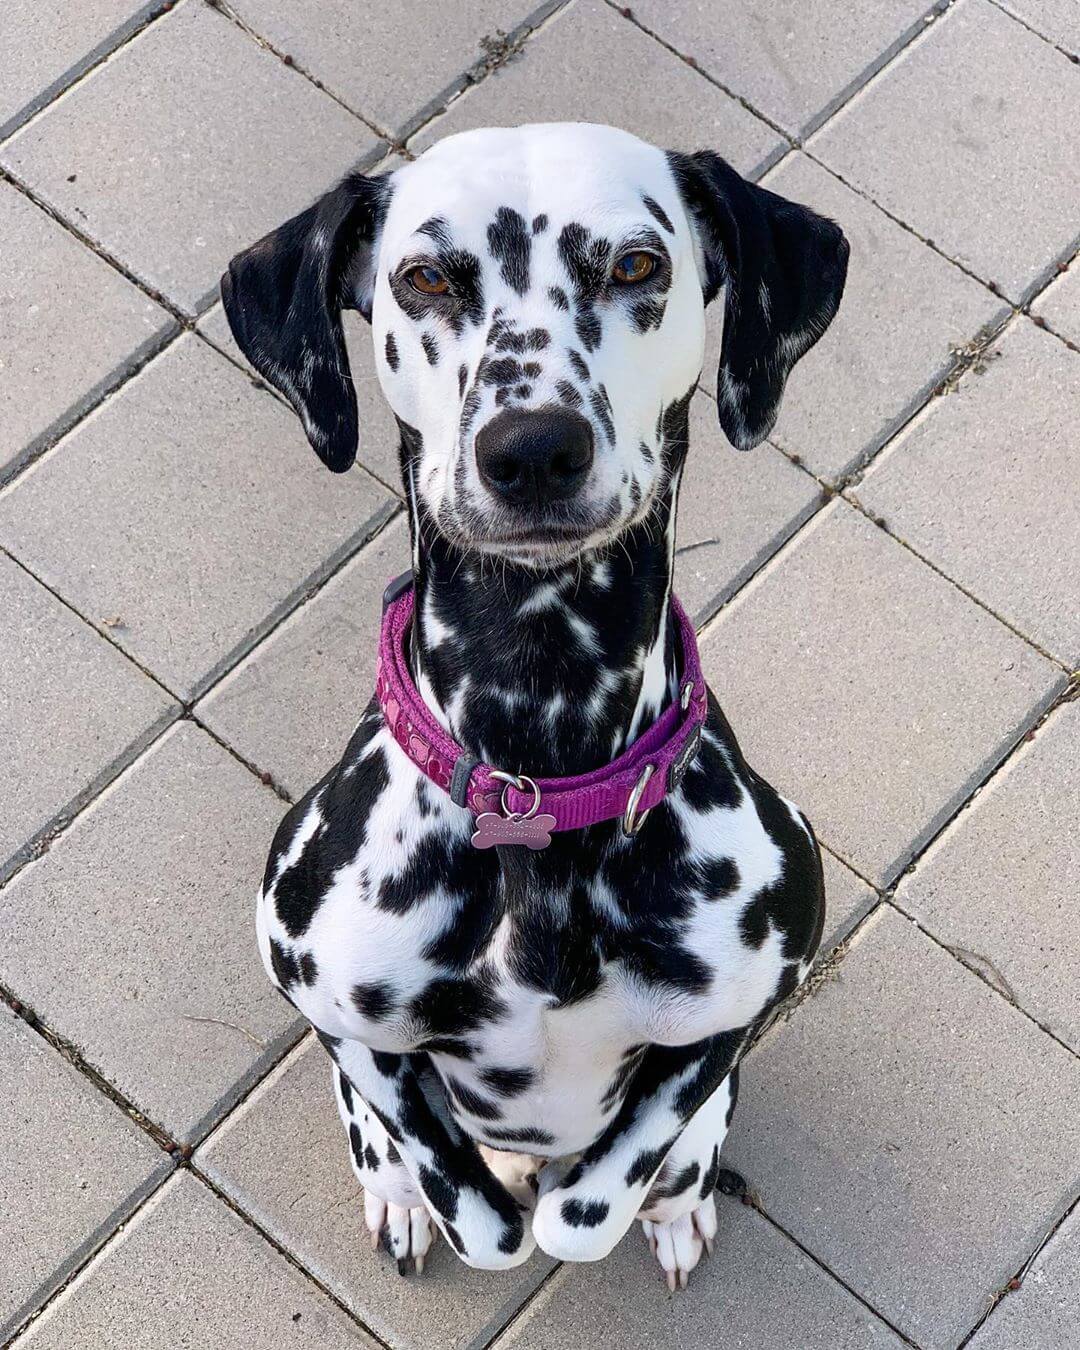 15 Amazing Facts About Dalmatians You Probably Never Knew